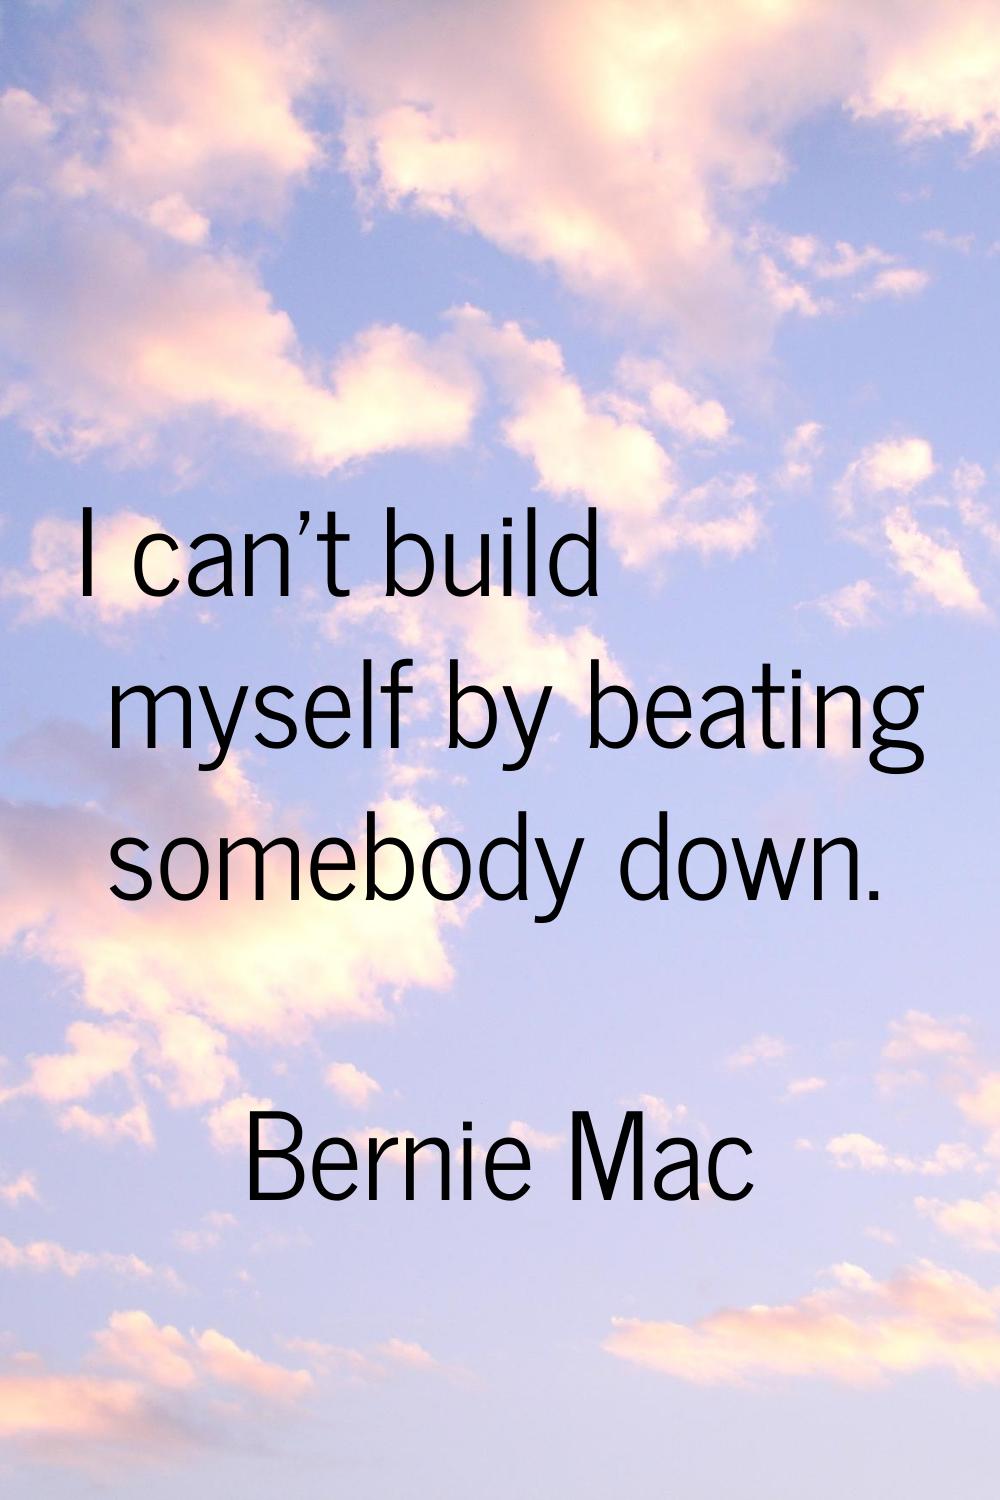 I can't build myself by beating somebody down.